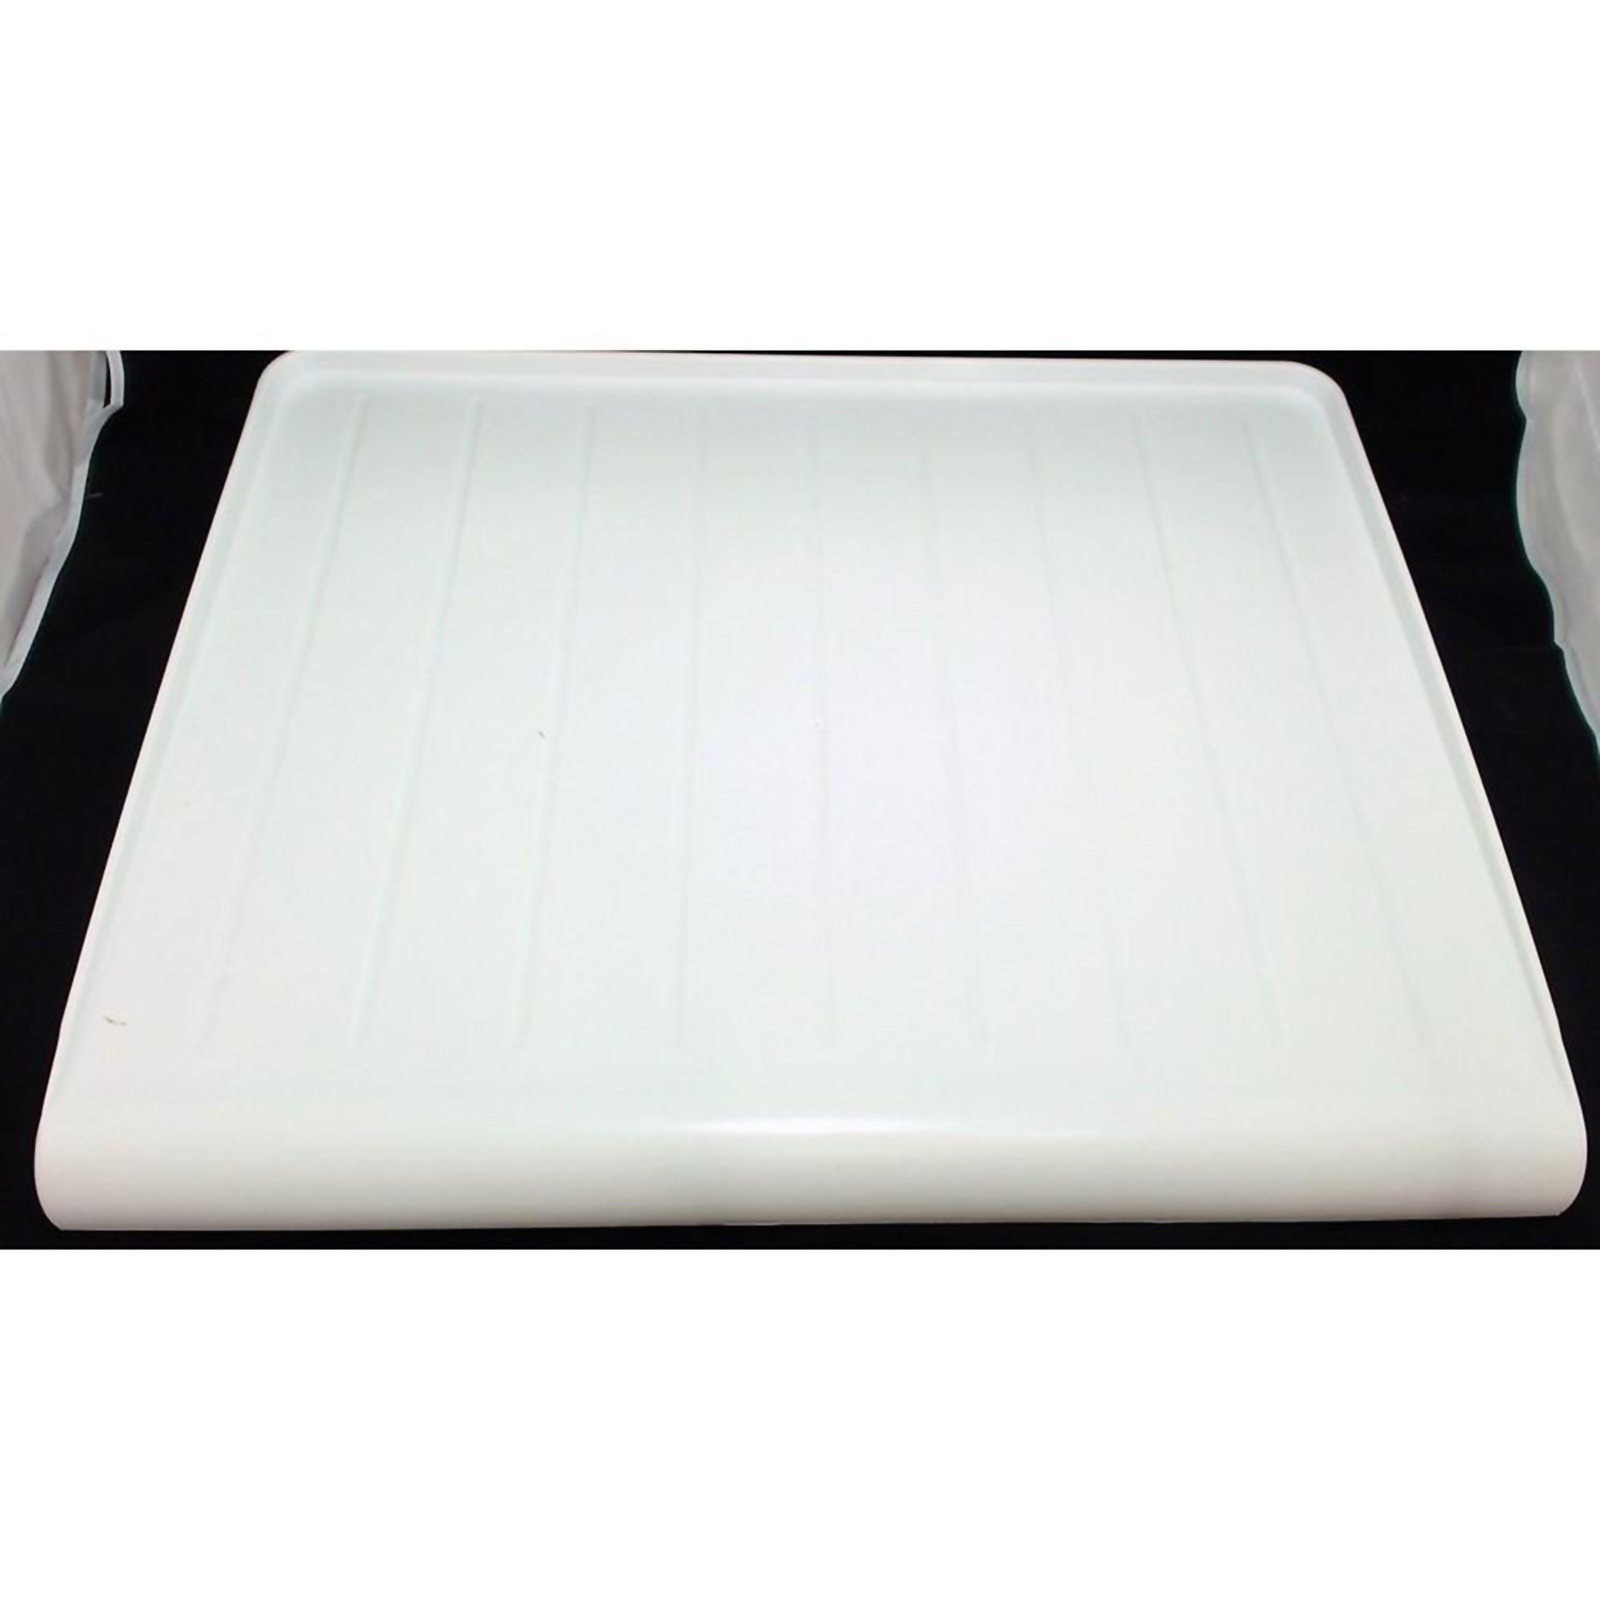 SUPCO SIDPM8QVLM CS10398 Crisper Cover Replacement Tray for GE